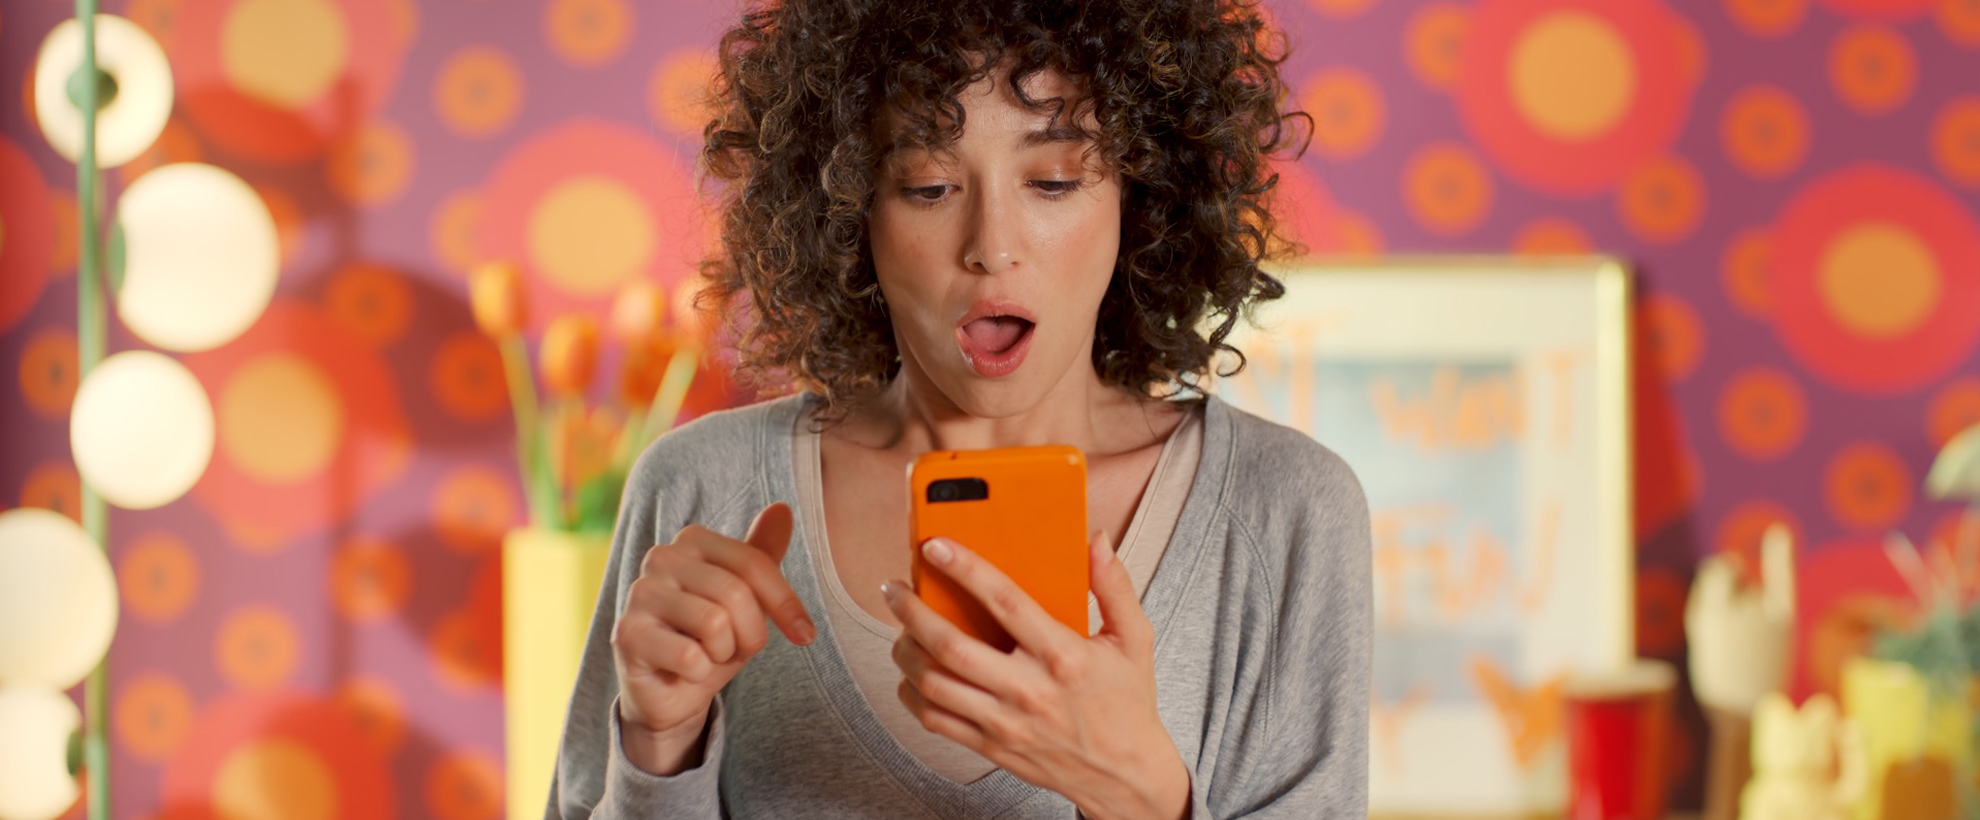 A young woman stares at a mobile phone with an orange cover, in a brightly coloured bedroom